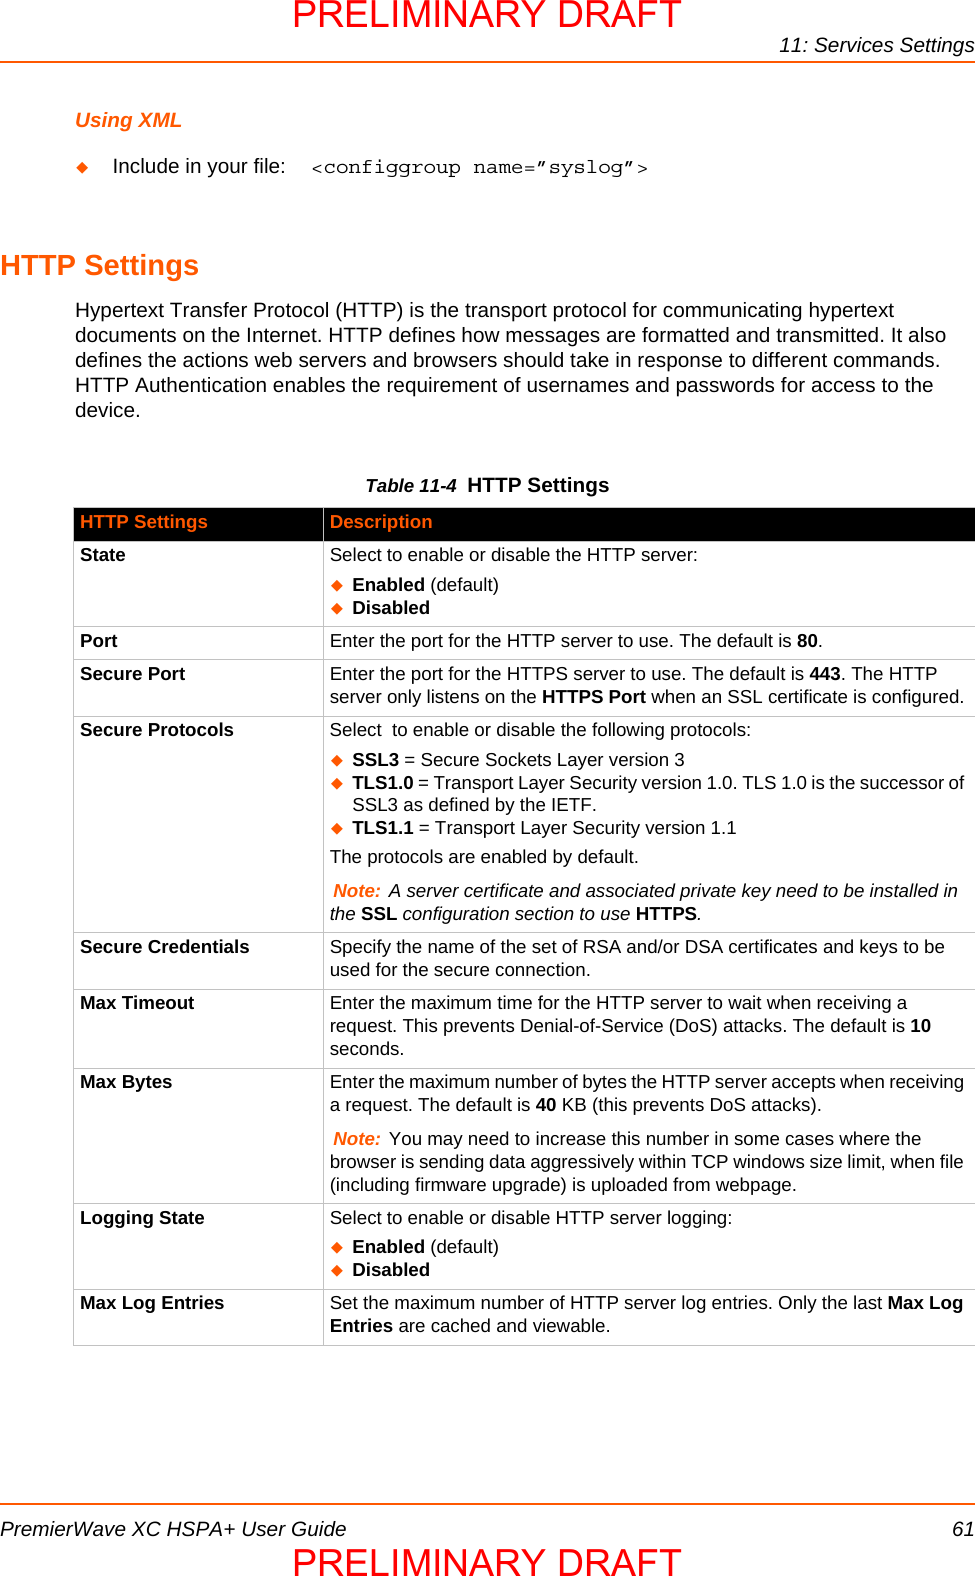 11: Services SettingsPremierWave XC HSPA+ User Guide 61Using XMLInclude in your file:  &lt;configgroup name=”syslog”&gt;HTTP SettingsHypertext Transfer Protocol (HTTP) is the transport protocol for communicating hypertext documents on the Internet. HTTP defines how messages are formatted and transmitted. It also defines the actions web servers and browsers should take in response to different commands.  HTTP Authentication enables the requirement of usernames and passwords for access to the  device. Table 11-4  HTTP SettingsHTTP Settings DescriptionState Select to enable or disable the HTTP server:Enabled (default)DisabledPort Enter the port for the HTTP server to use. The default is 80.Secure Port Enter the port for the HTTPS server to use. The default is 443. The HTTP server only listens on the HTTPS Port when an SSL certificate is configured.Secure Protocols Select  to enable or disable the following protocols:SSL3 = Secure Sockets Layer version 3TLS1.0 = Transport Layer Security version 1.0. TLS 1.0 is the successor of SSL3 as defined by the IETF.TLS1.1 = Transport Layer Security version 1.1The protocols are enabled by default.Note: A server certificate and associated private key need to be installed in the SSL configuration section to use HTTPS.Secure Credentials Specify the name of the set of RSA and/or DSA certificates and keys to be used for the secure connection.Max Timeout Enter the maximum time for the HTTP server to wait when receiving a request. This prevents Denial-of-Service (DoS) attacks. The default is 10 seconds.Max Bytes Enter the maximum number of bytes the HTTP server accepts when receiving a request. The default is 40 KB (this prevents DoS attacks).Note: You may need to increase this number in some cases where the browser is sending data aggressively within TCP windows size limit, when file (including firmware upgrade) is uploaded from webpage.Logging State Select to enable or disable HTTP server logging:Enabled (default)DisabledMax Log Entries Set the maximum number of HTTP server log entries. Only the last Max Log Entries are cached and viewable.PRELIMINARY DRAFTPRELIMINARY DRAFT